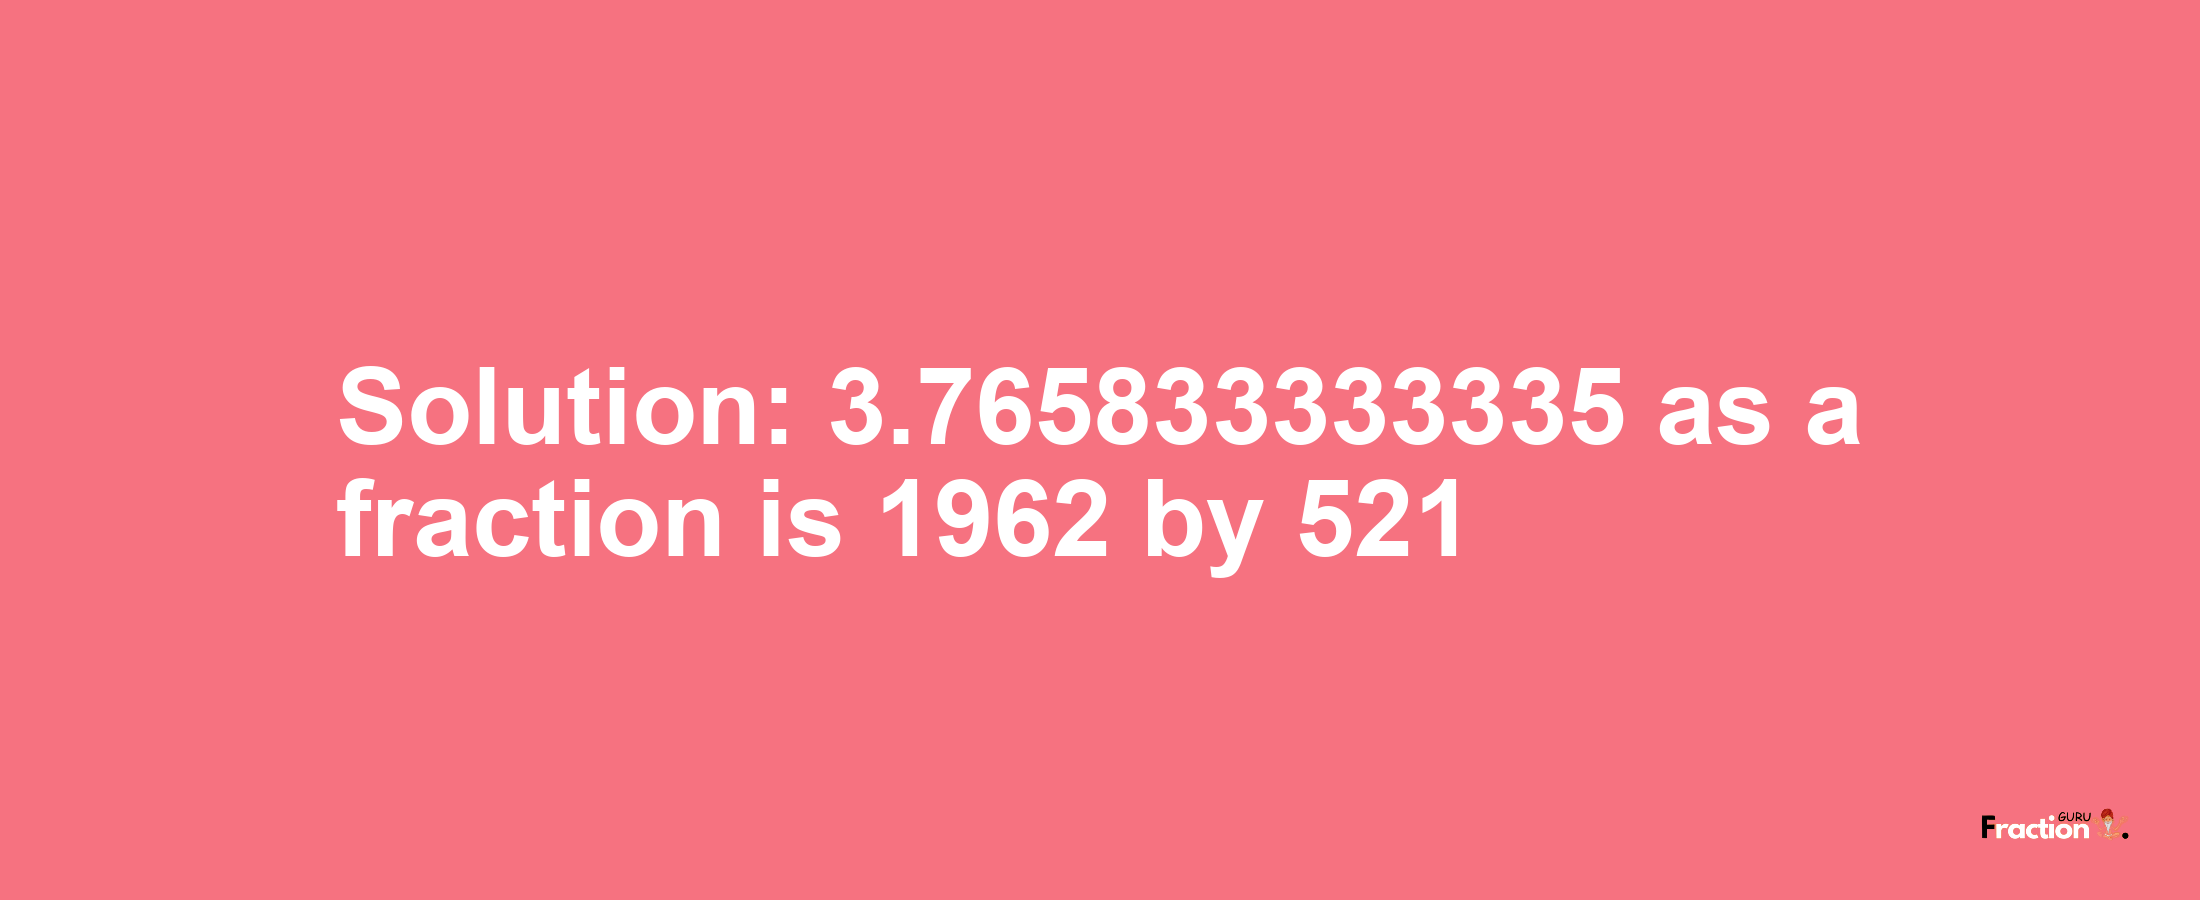 Solution:3.765833333335 as a fraction is 1962/521